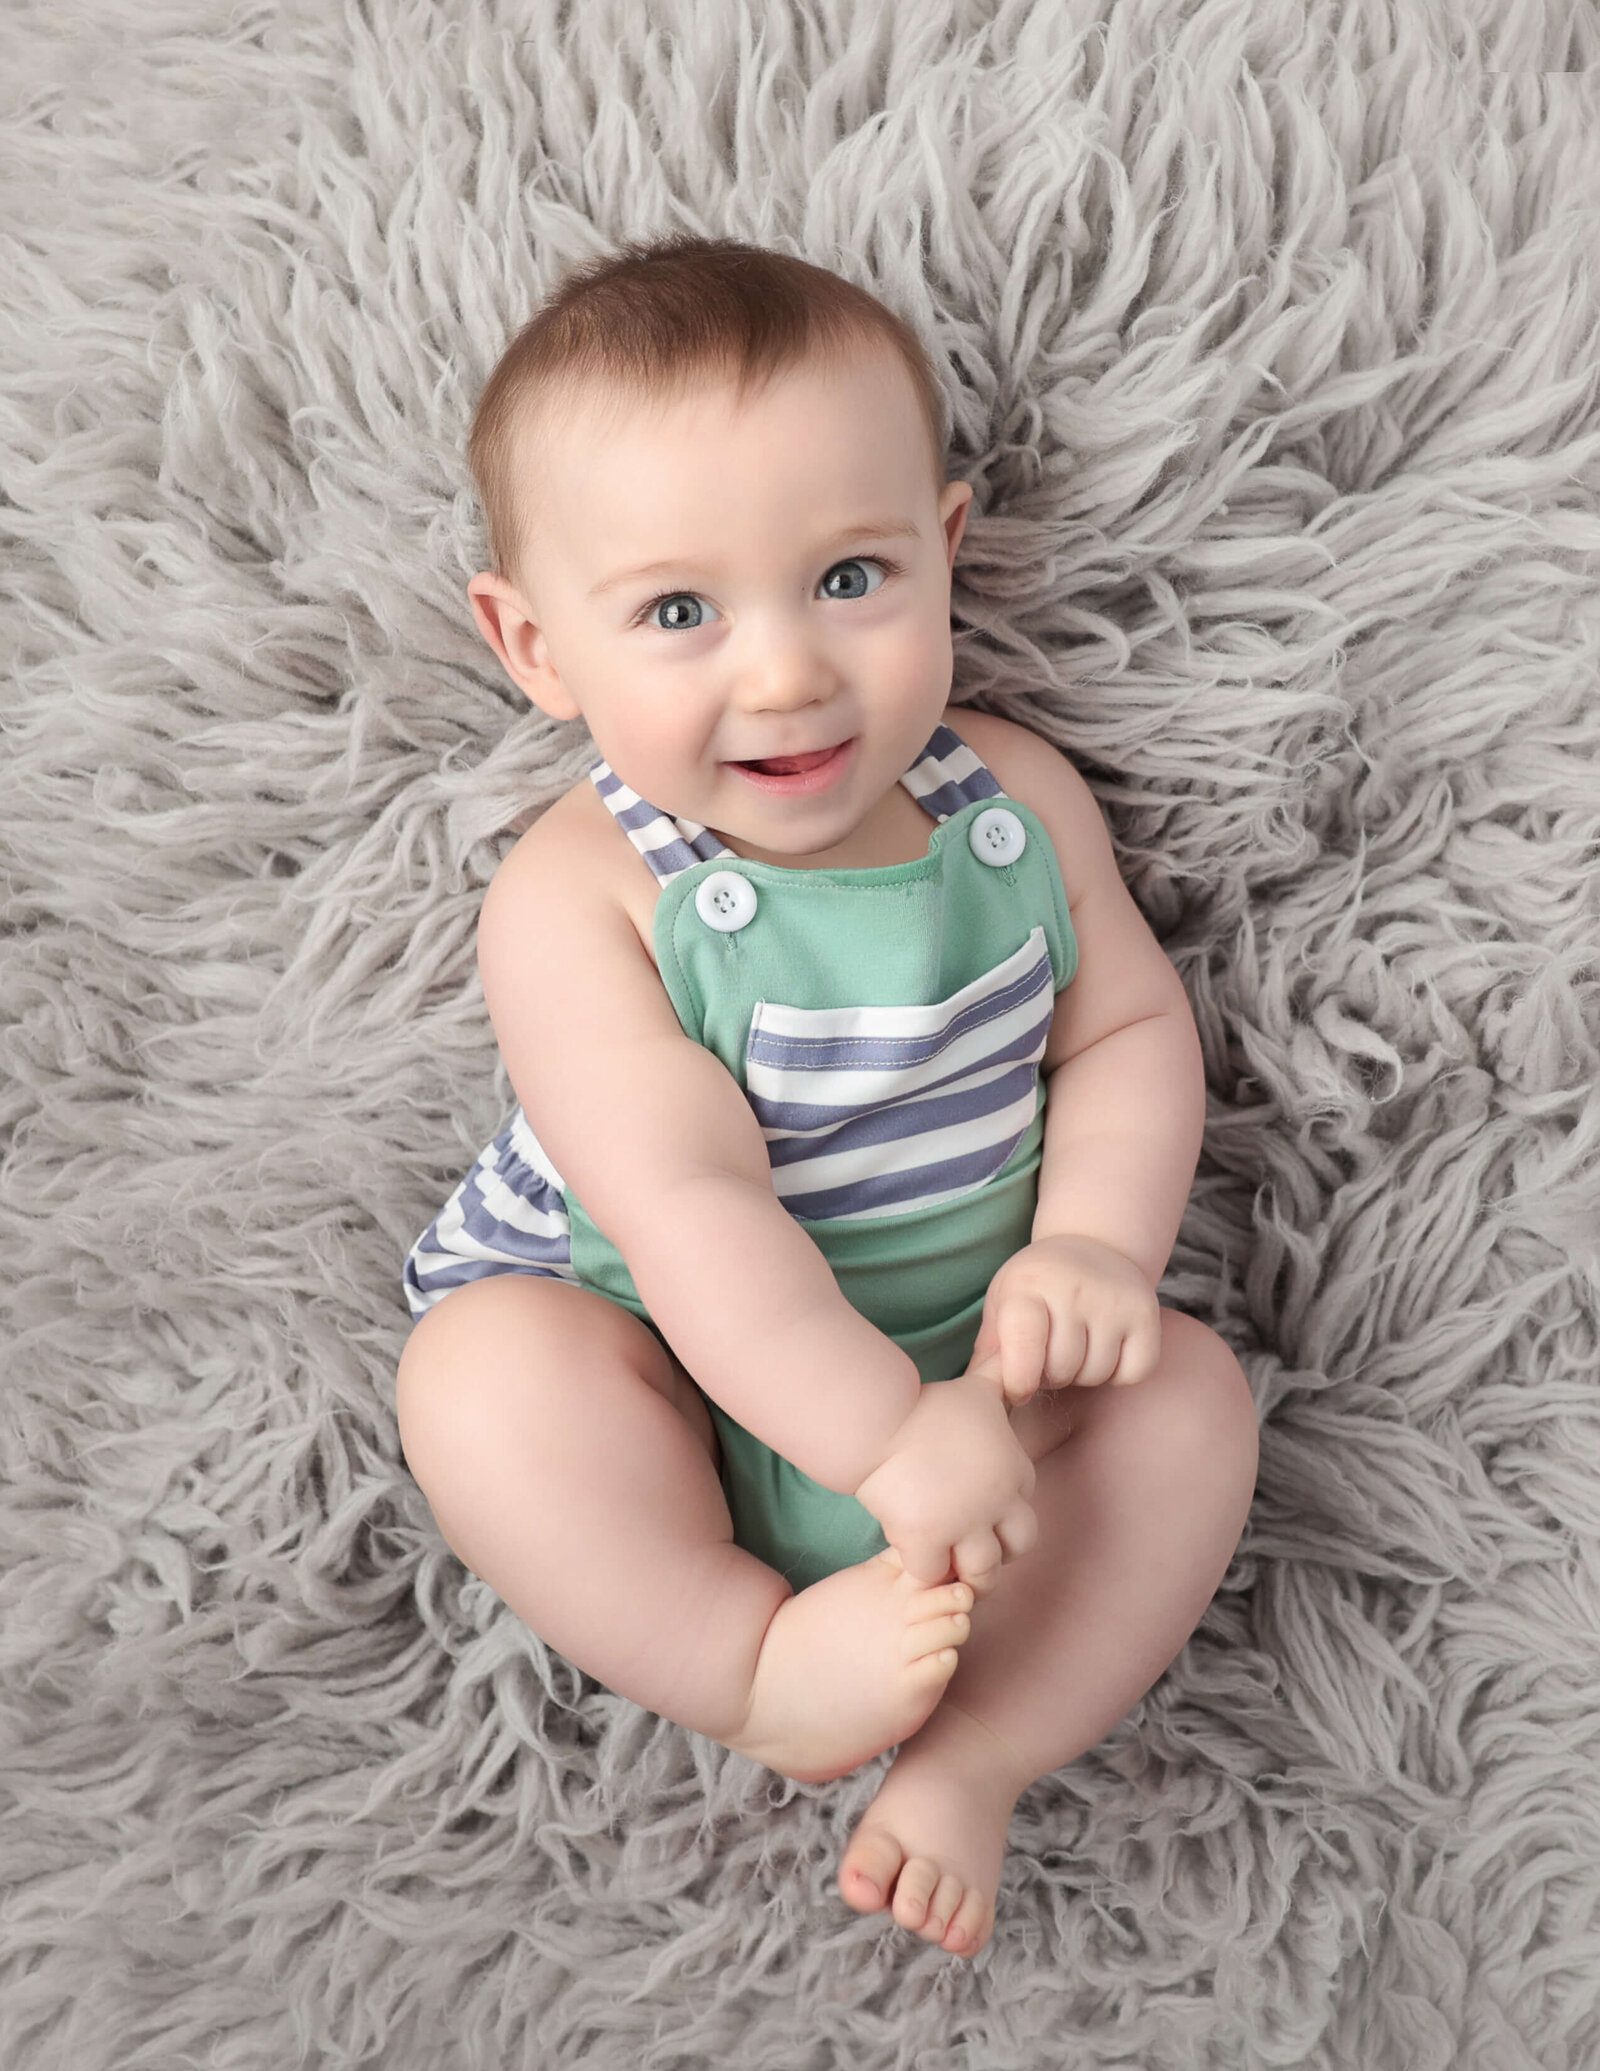 Smiling 6 month old laying on his back, Rochester, Ny studio.